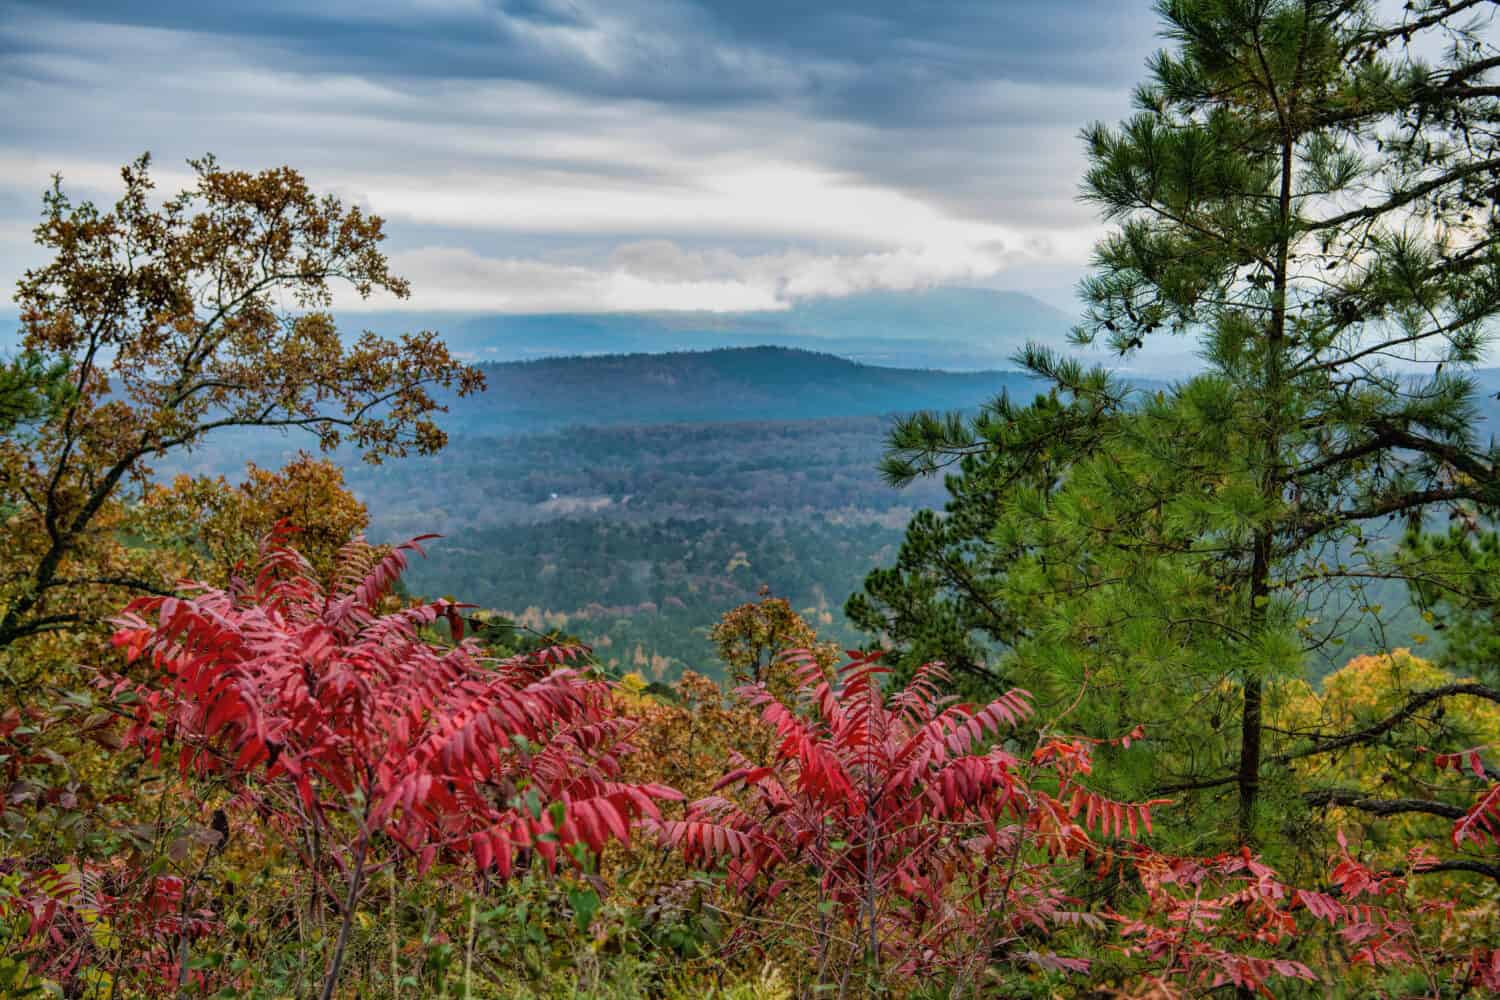 Beautiful Scenic Overlook at Mount Magazine with Bright Red Sumac in Foreground and Blue Peaks and Clouds in Background over Petit Jean Valley